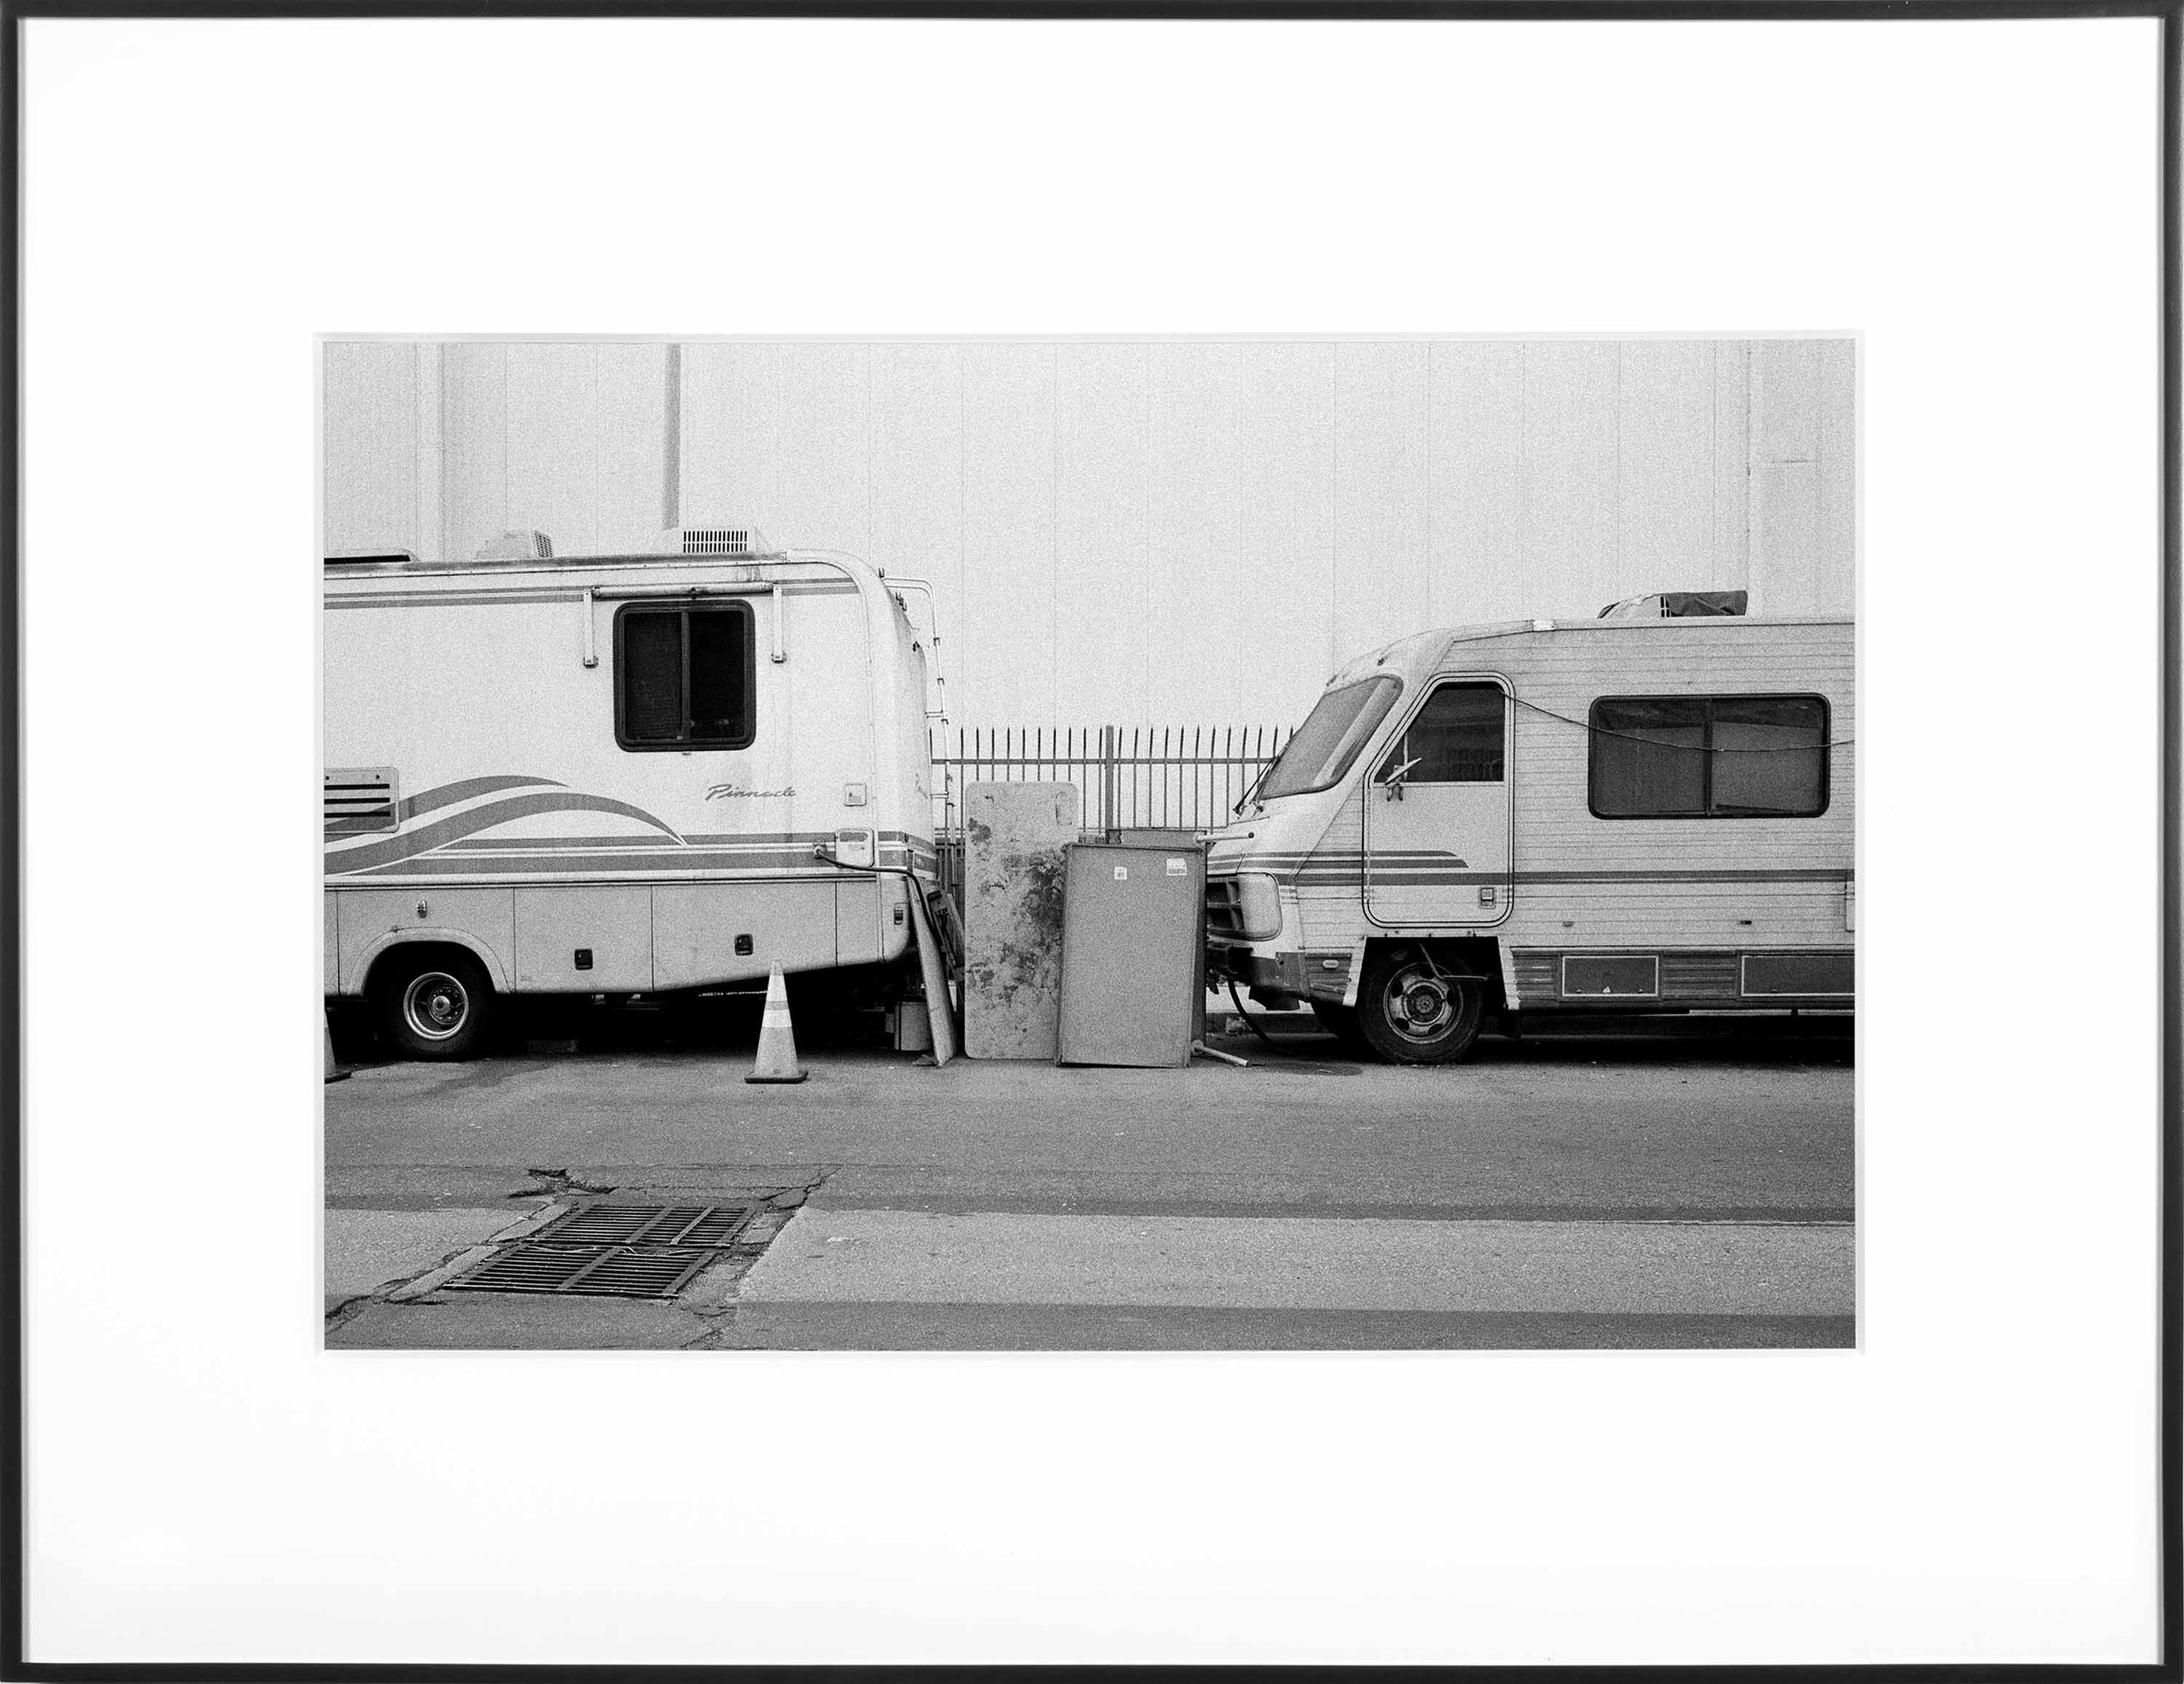   (Temporary) Homes for America: 3300 block to 4400 block, Union Pacific Avenue, between South Grande Vista Avenue and South Marianna Avenue, Los Angeles/Commerce, California, December 2020    2021   black and white fiber print  9 1/2 x 13 inches (24